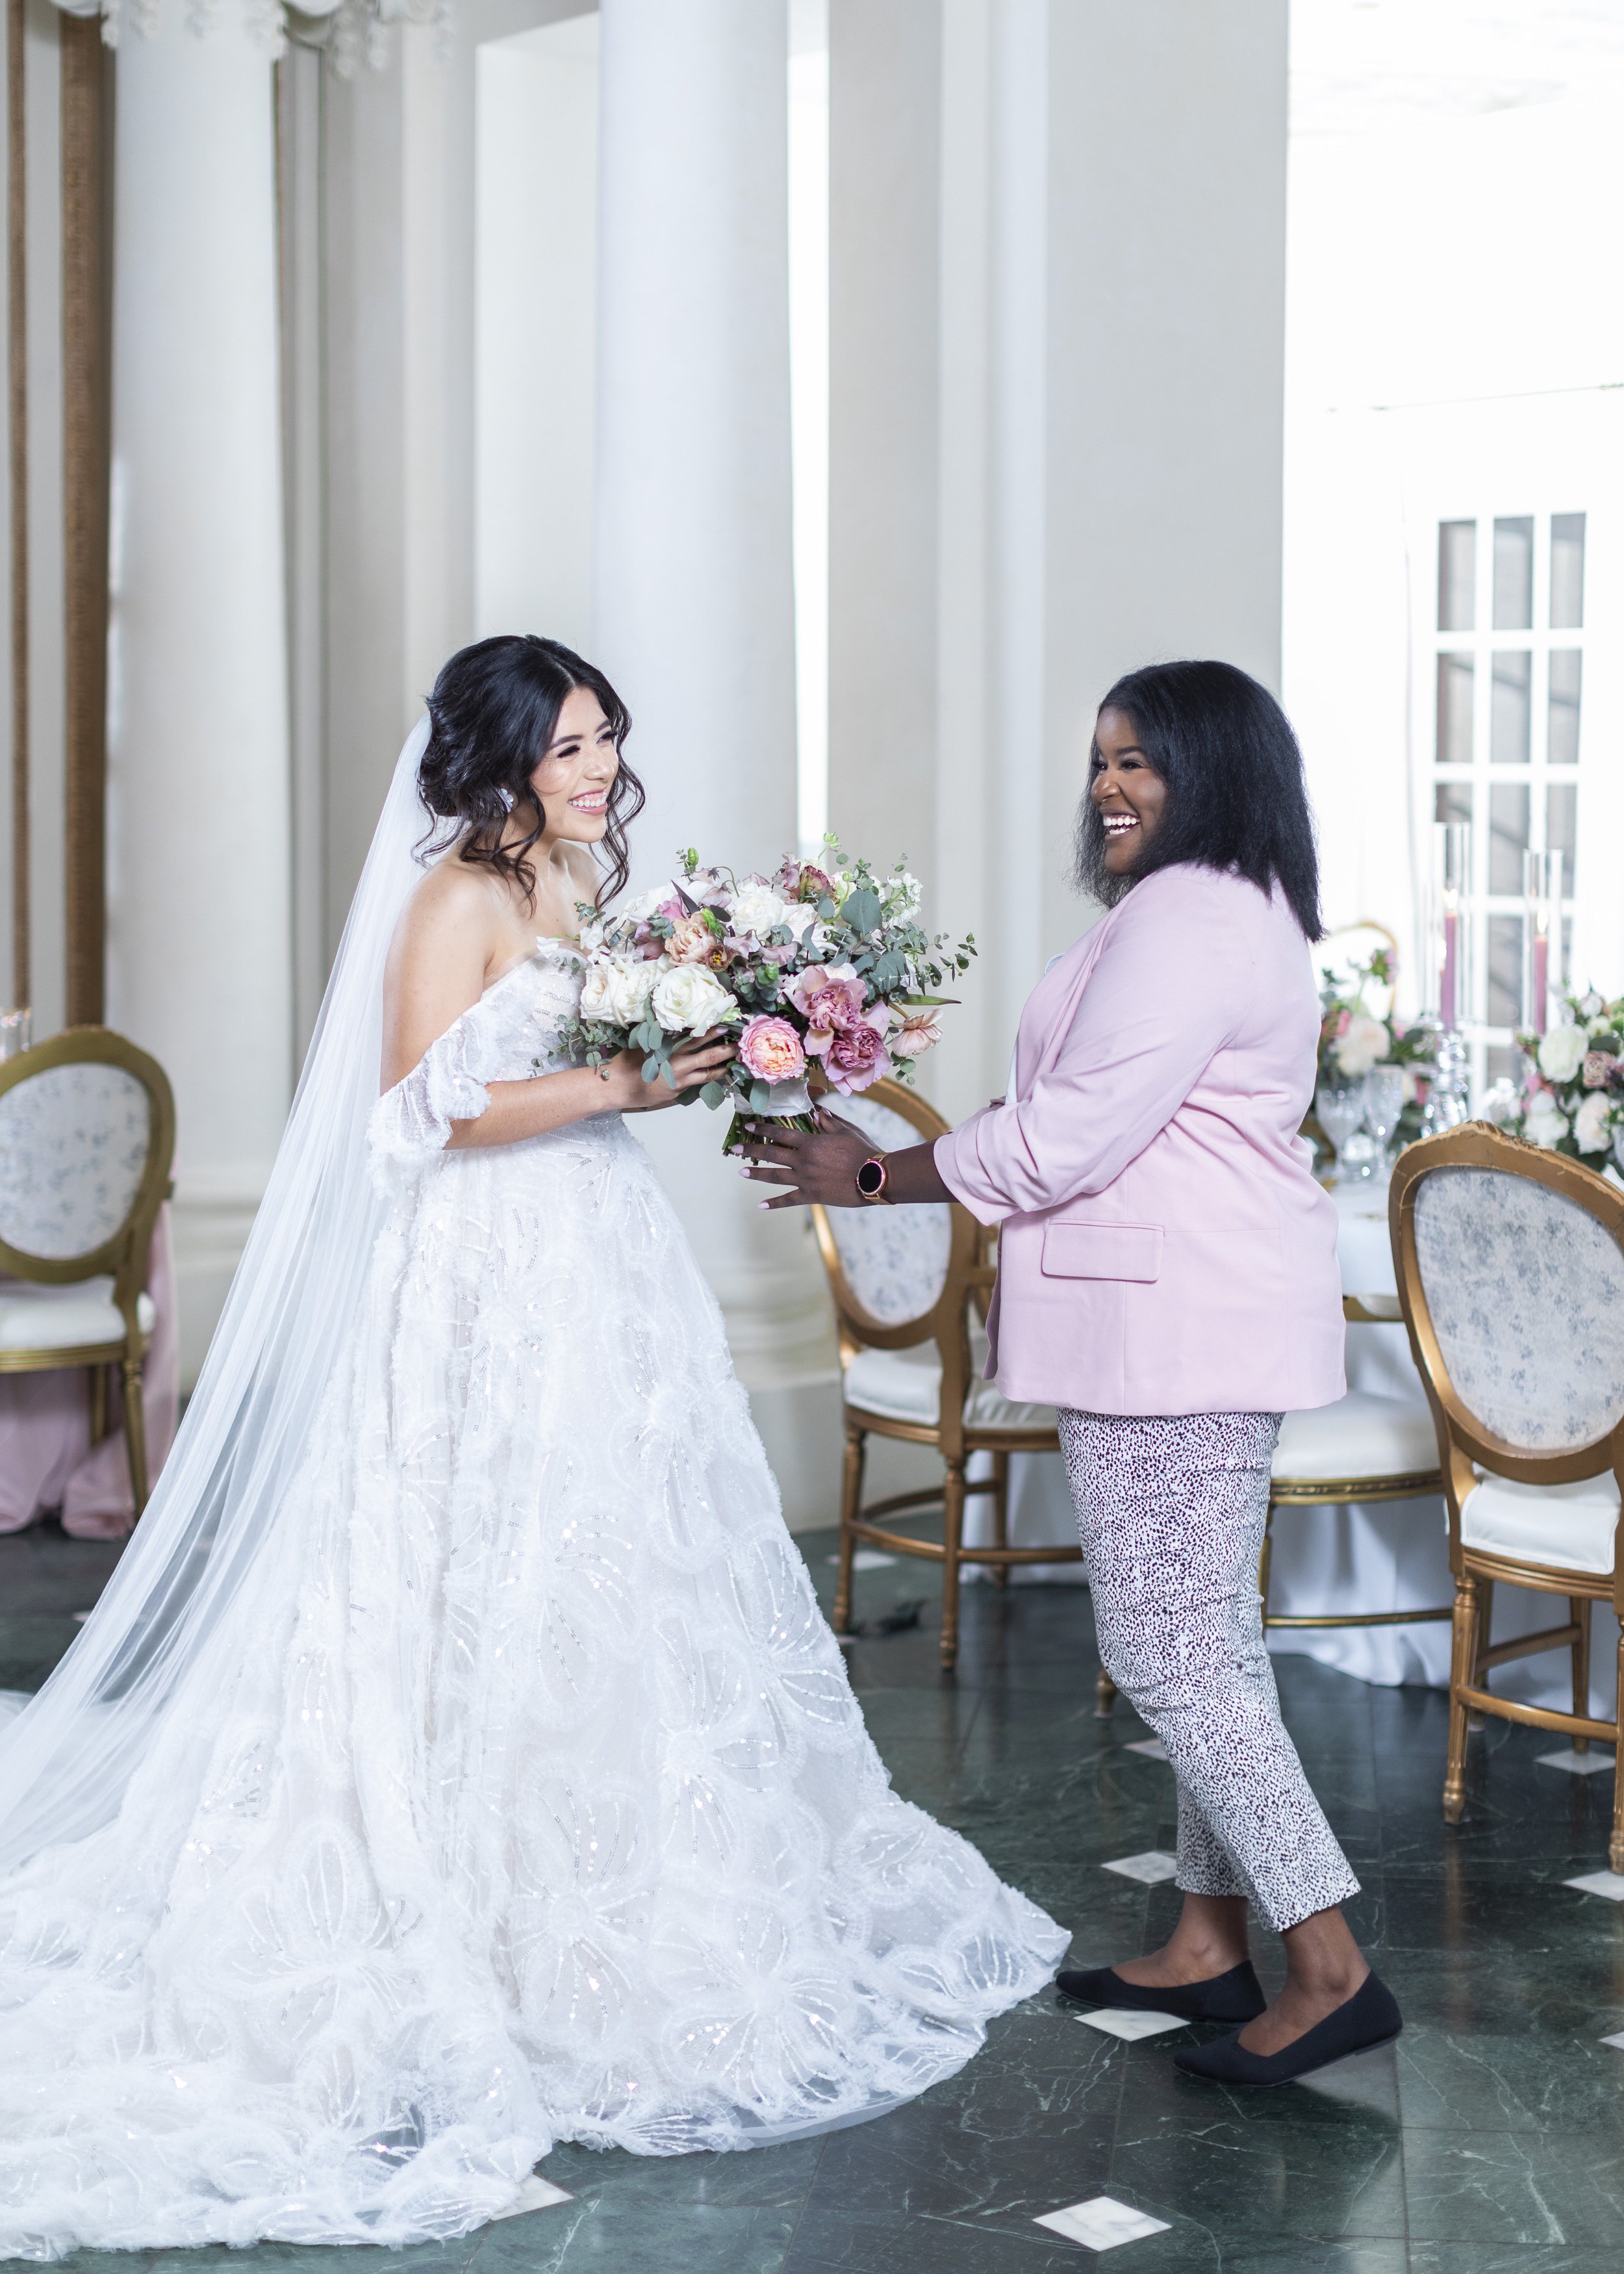  Why should you invest in a wedding planner by Savanna Richardson Photography? Utah wedding photographer high-end wedding photographer Utah #savannarichardsonphotography #weddingplannervsvenuecooridnator #weddingphotographer #weddingphotographersUtah